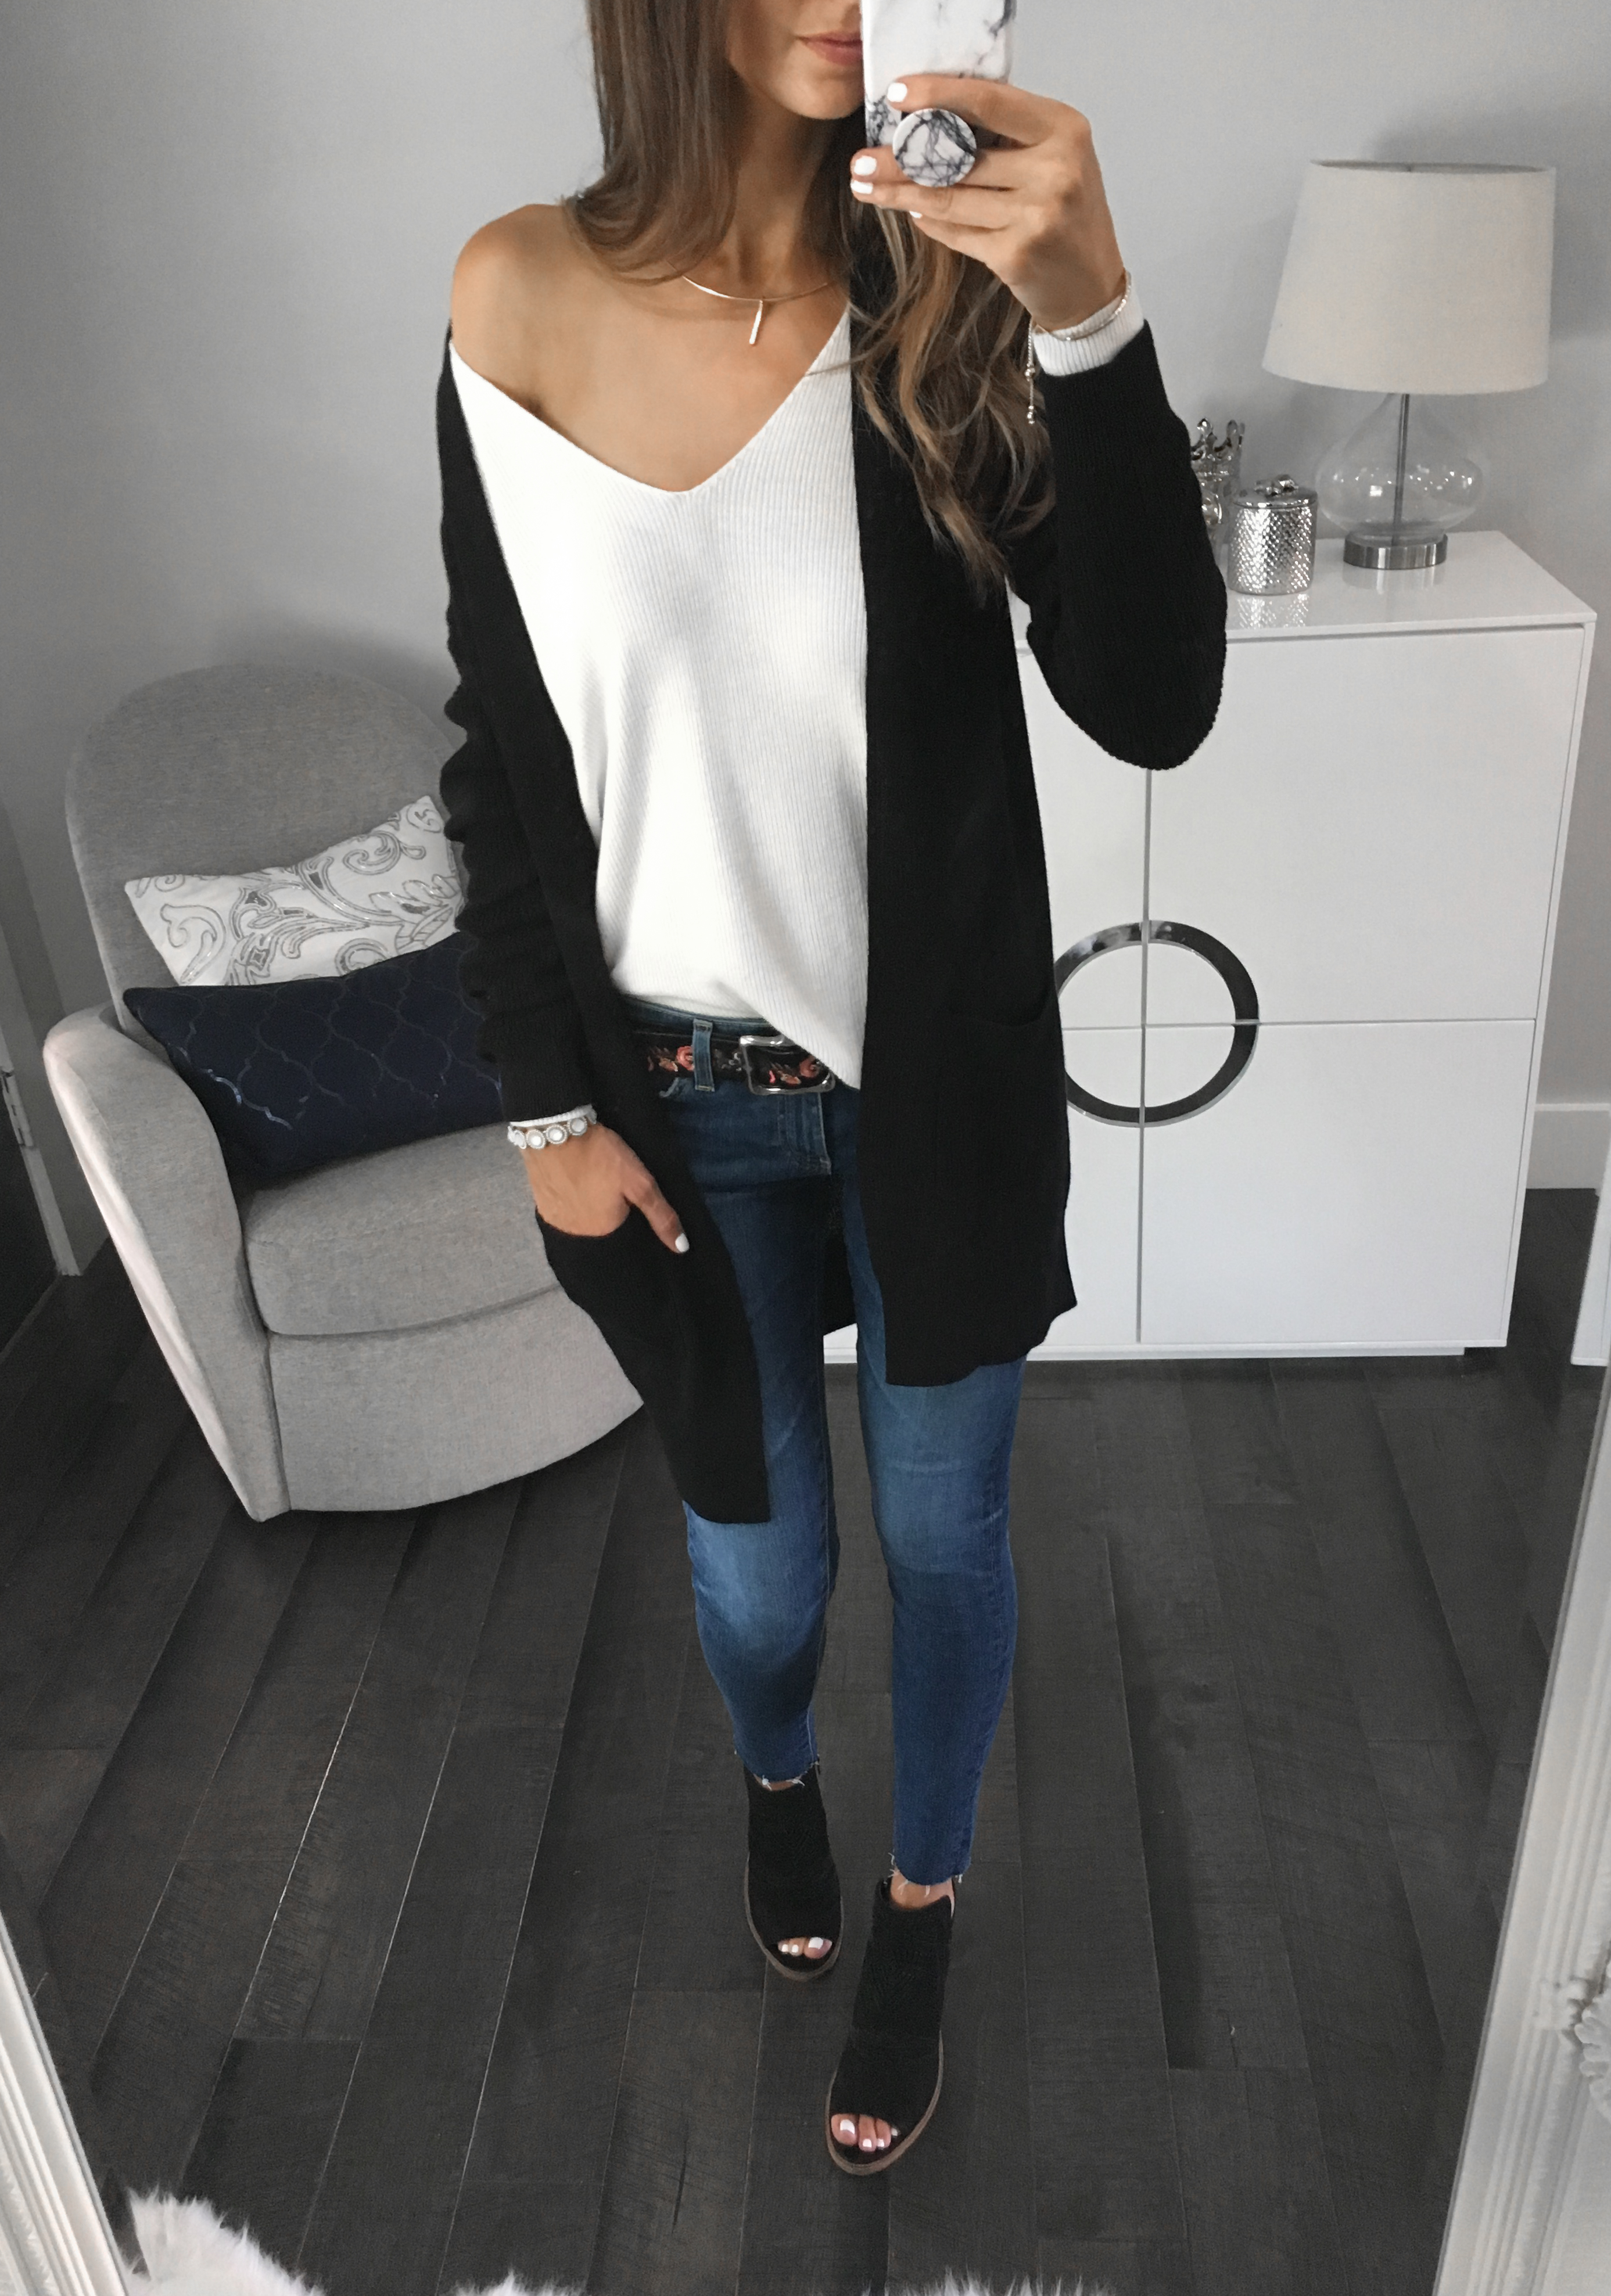 My Top 6 Outfits from the Nordstrom Anniversary Sale!